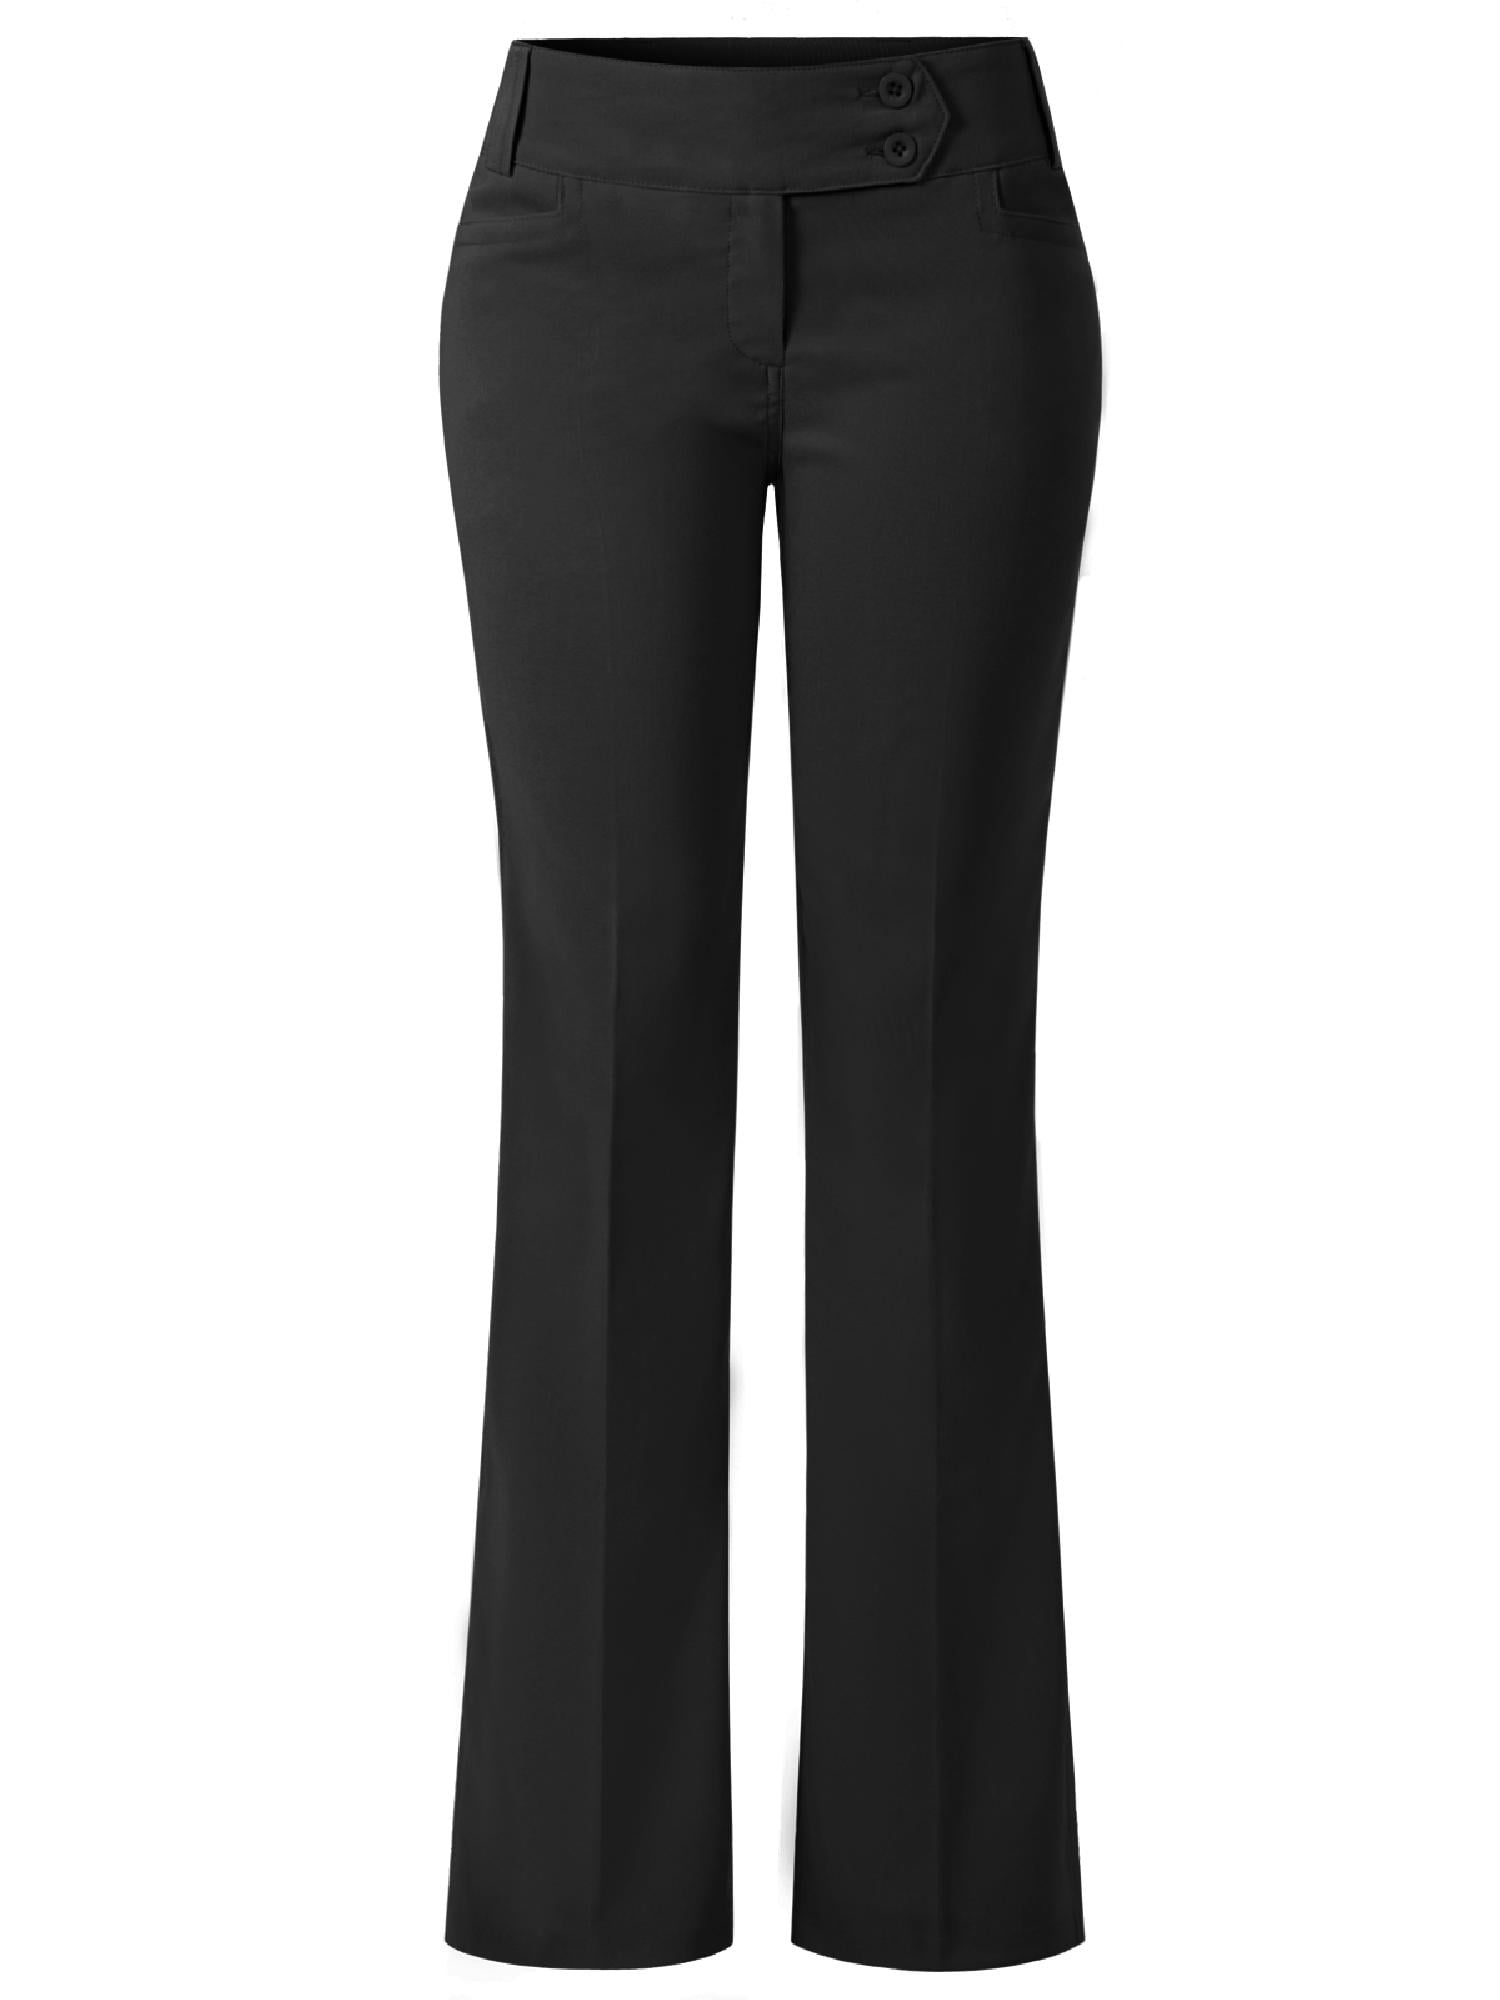 Aggregate 147+ office style pants super hot - in.eteachers